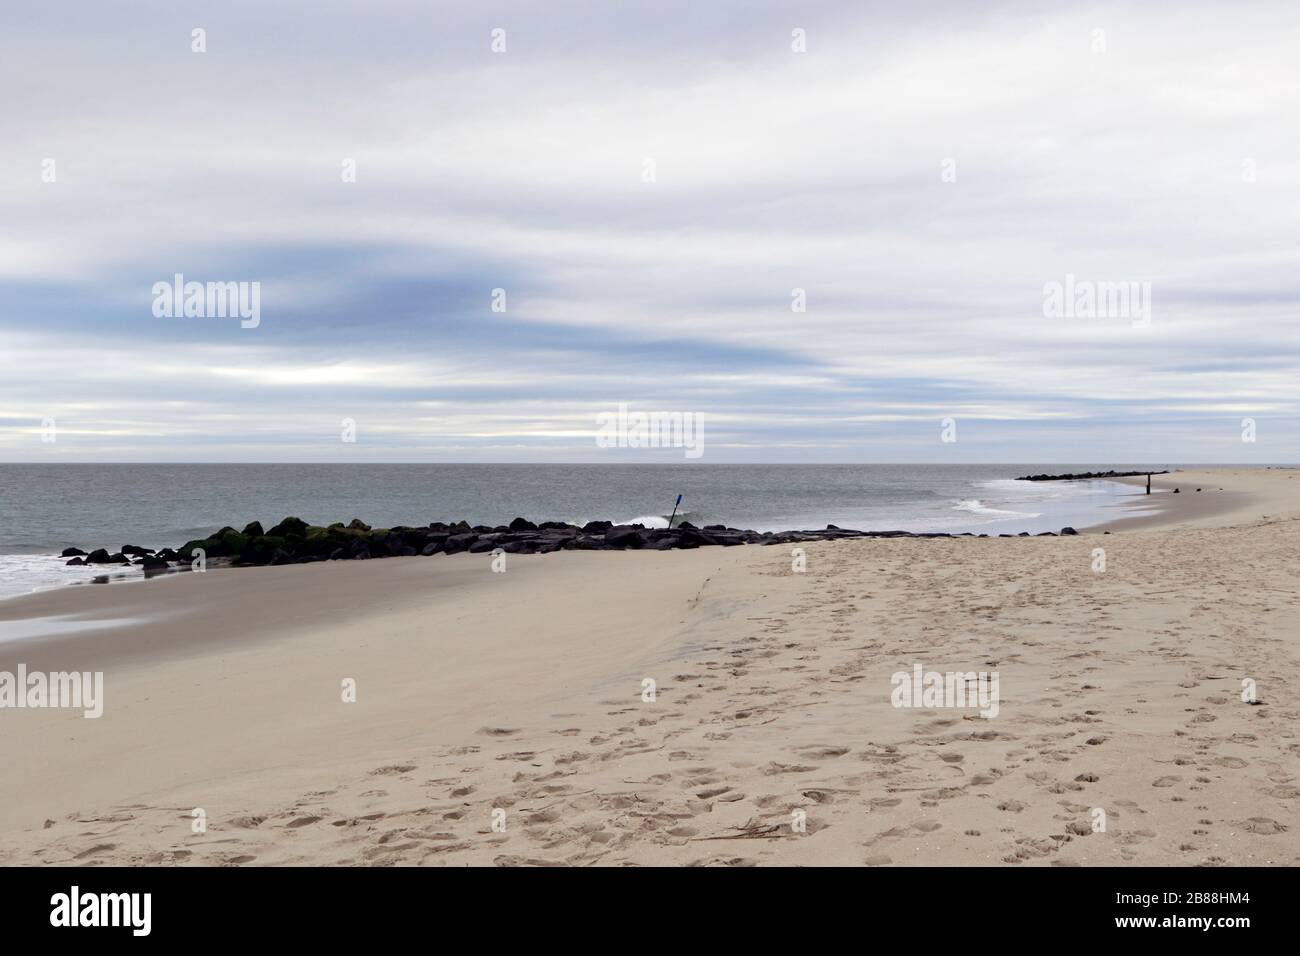 Die Ruhe in der Saison am Strand in Cape May, New Jersey, USA Stockfoto